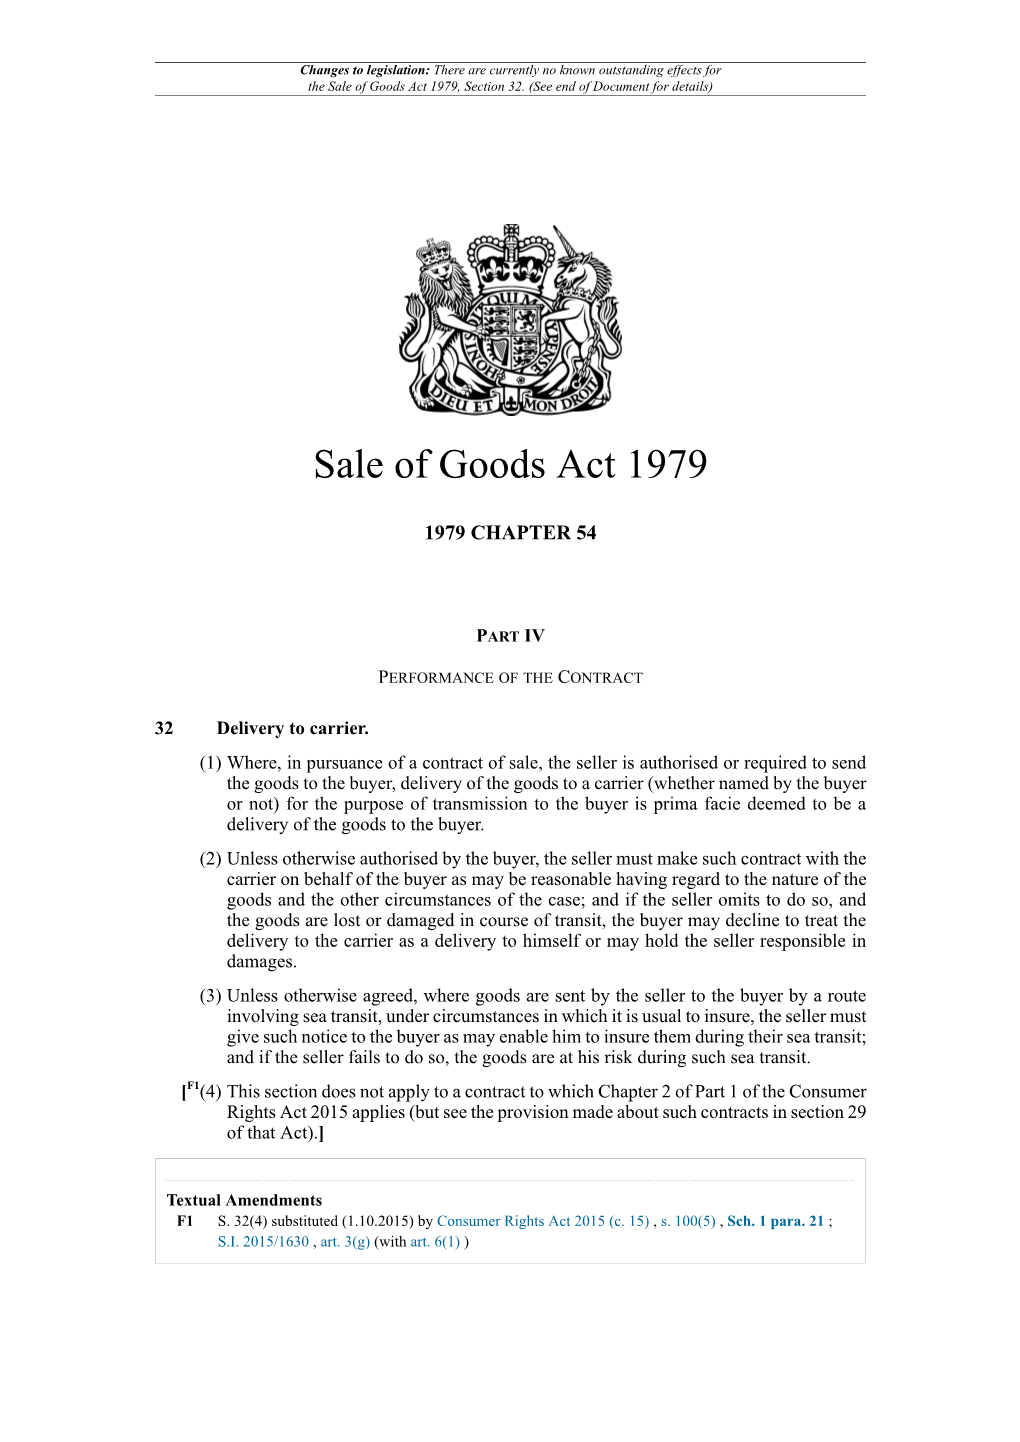 Sale of Goods Act 1979, Section 32